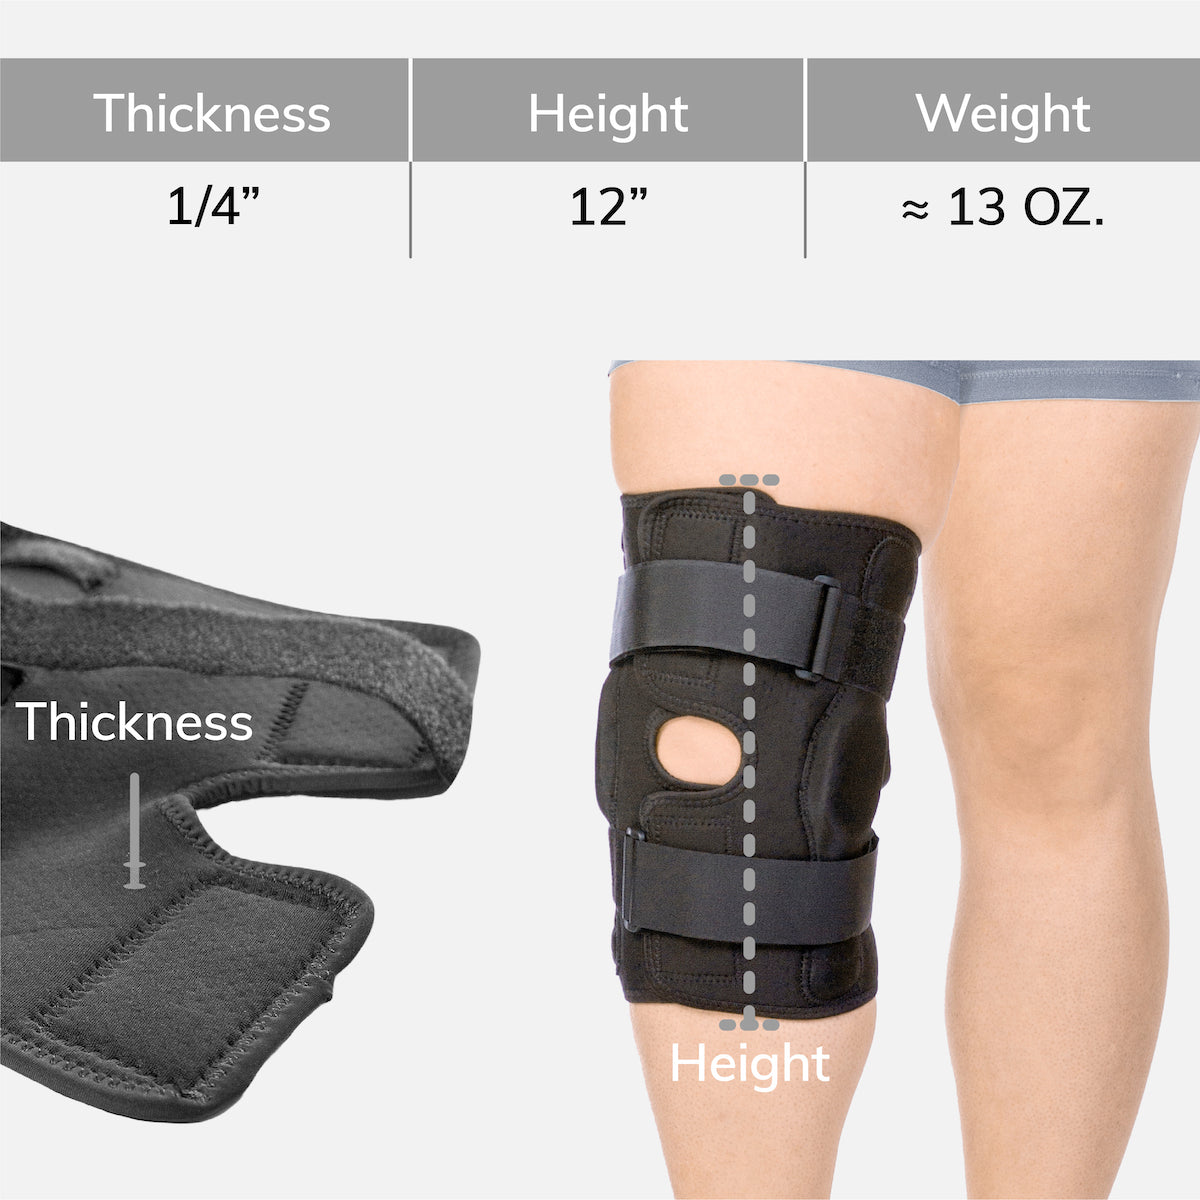 Best Knee Brace for Meniscus Tear: 5 Supportive Options